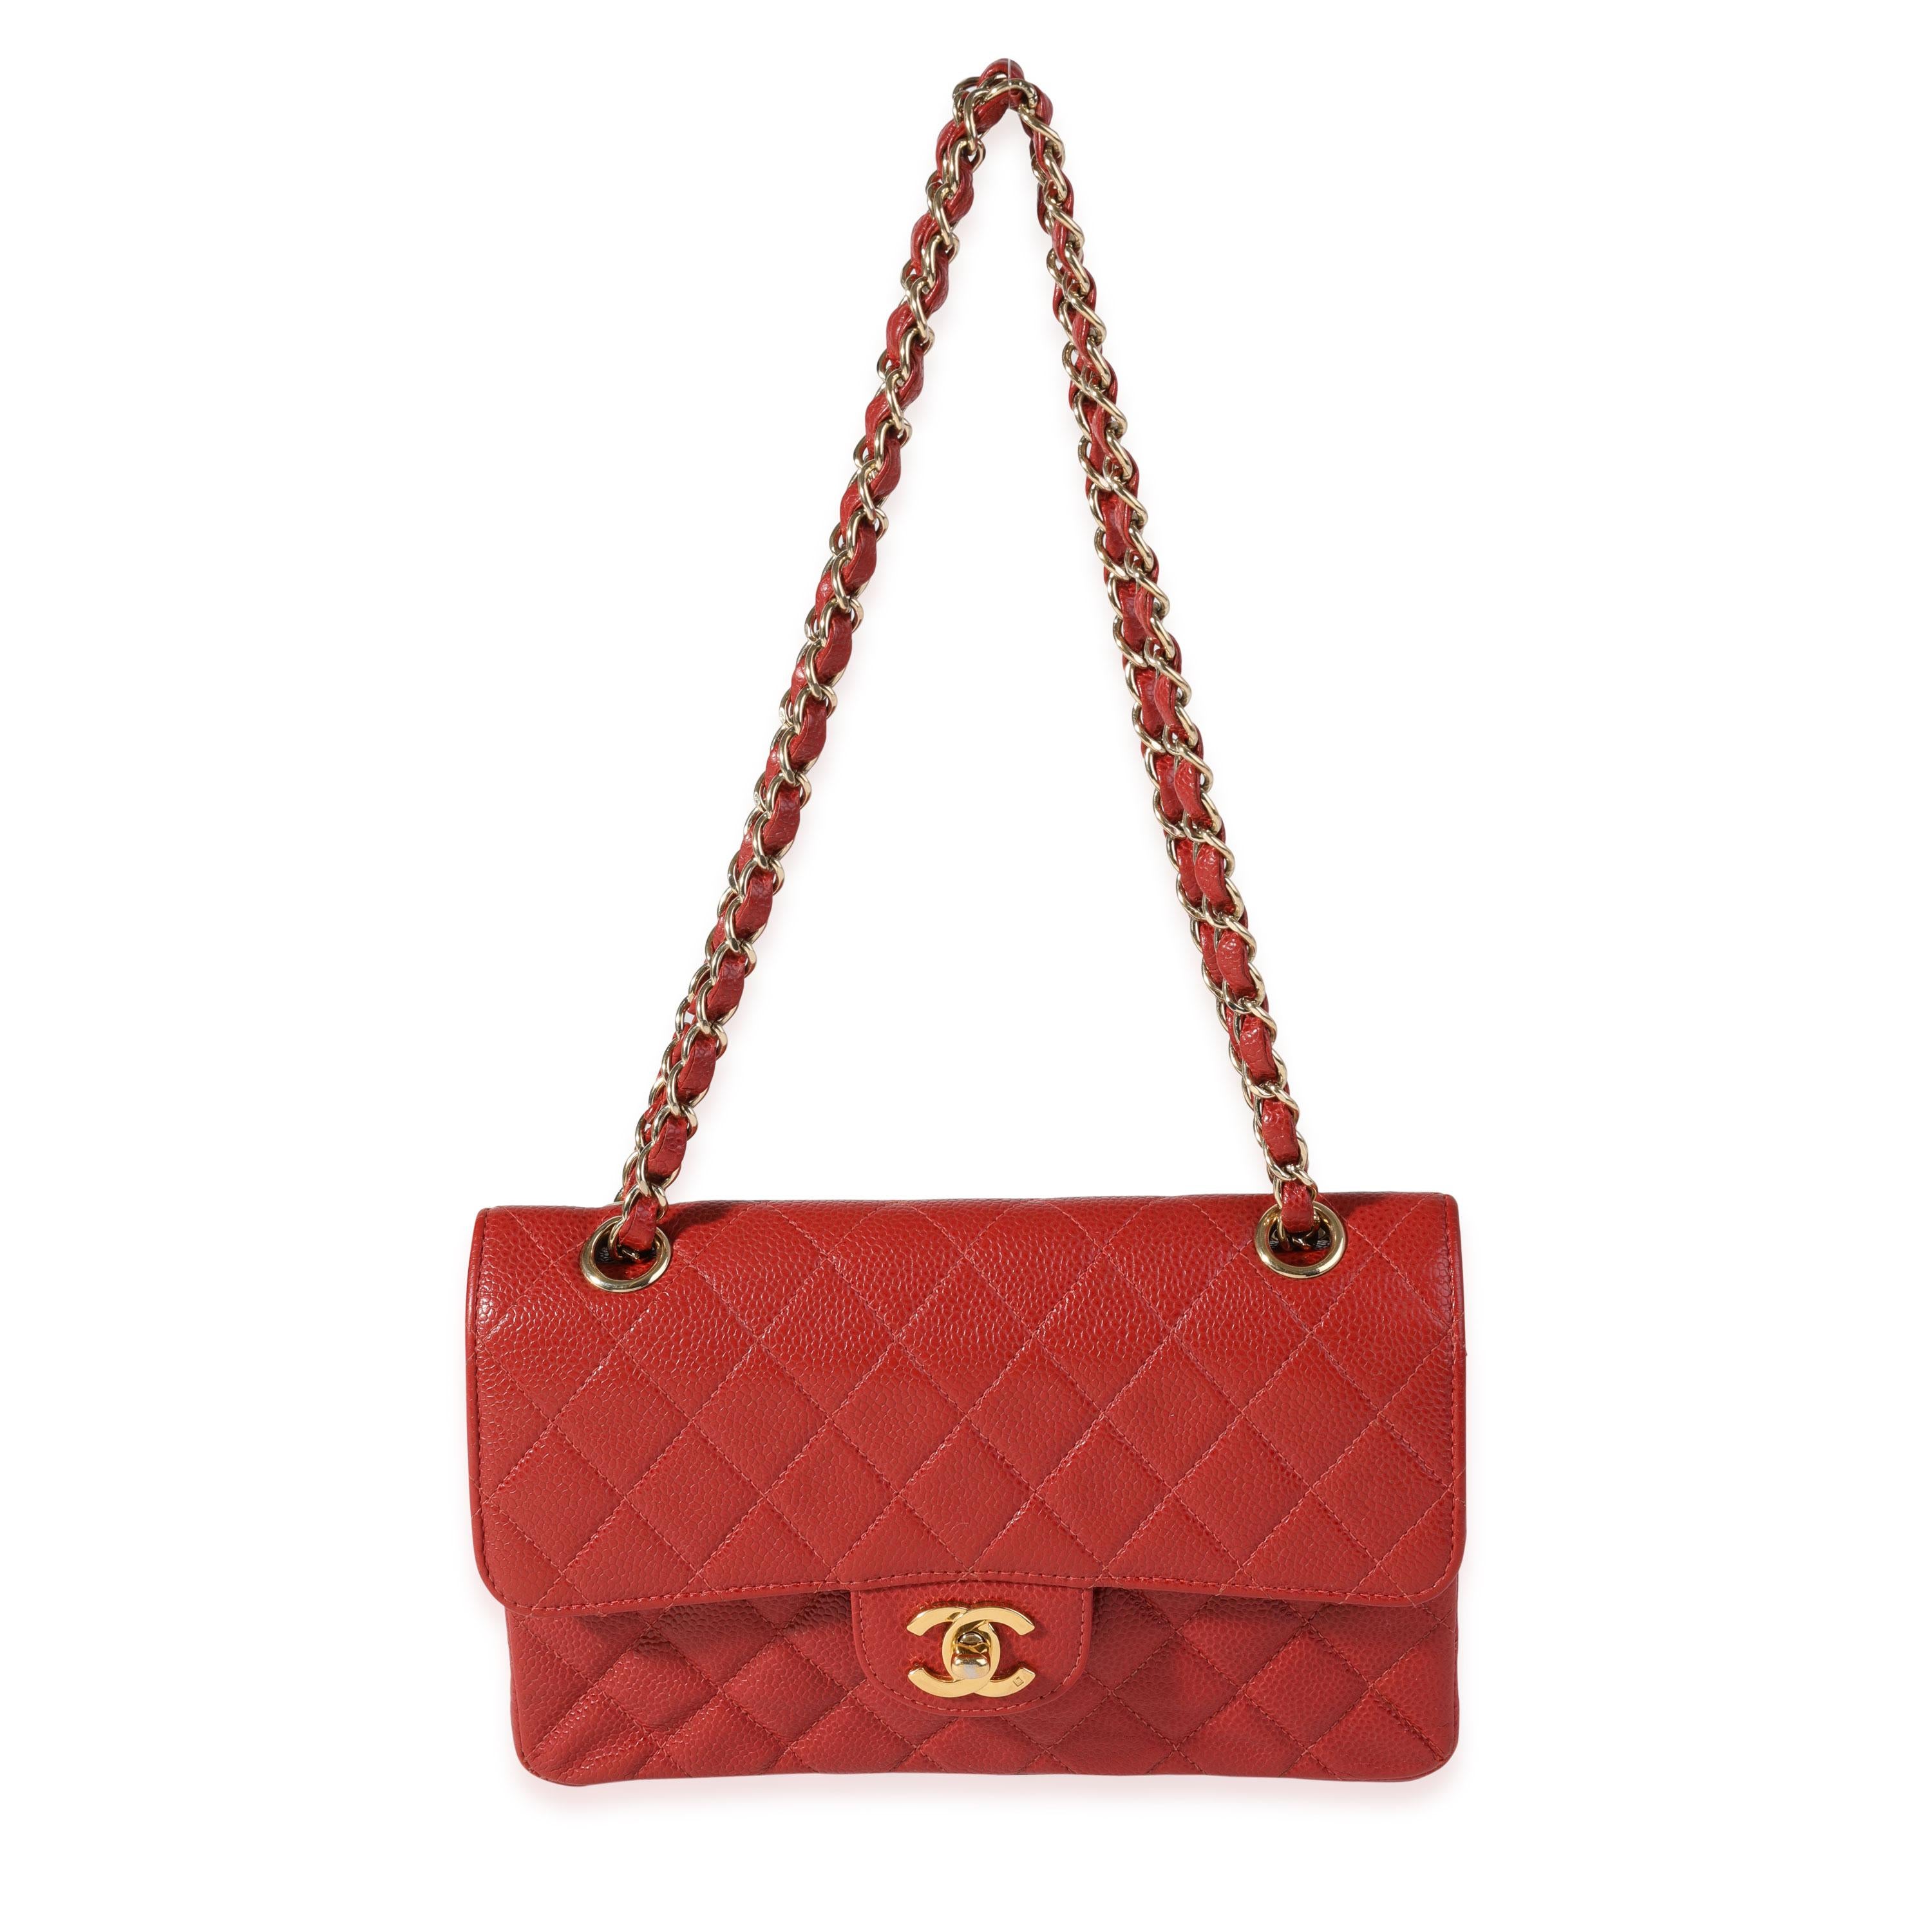 Listing Title: Chanel Red Quilted Caviar Small Classic Double Flap Bag
SKU: 121141
MSRP: 8200.00
Condition: Pre-owned 
Handbag Condition: Good
Condition Comments: Good Condition. Serial lightly ripped. Wear to corners. Scratching and tarnishing to